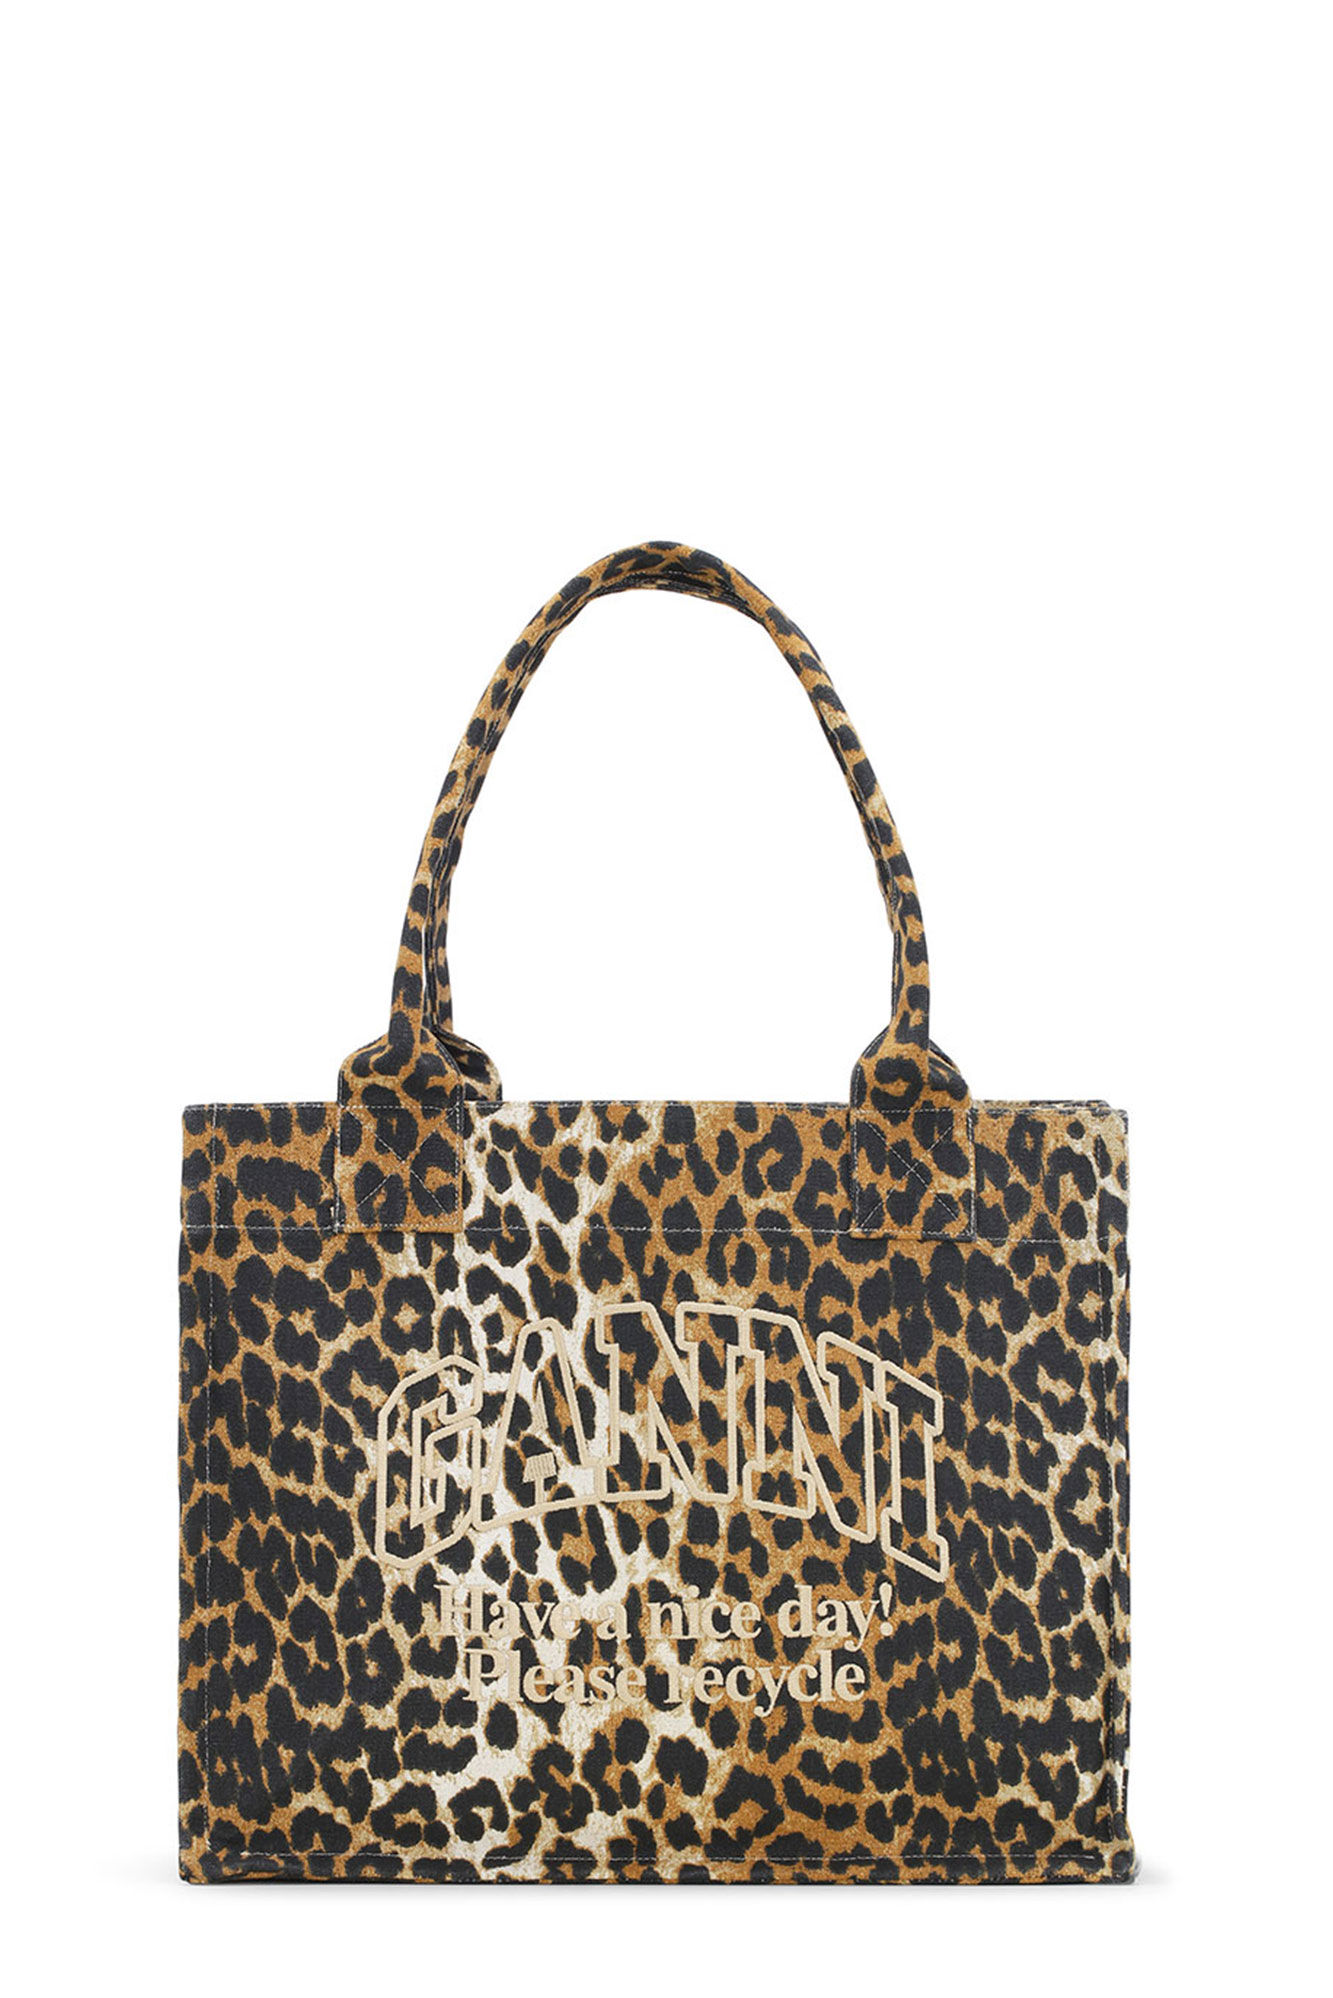 Leopard Print Tool Bag 14.8 Inch Wide Mouth Tool Storage Tote Bag with  Multi-Pockets Waterproof Heavy Duty Tool Bag Organizer with Adjustable  Shoulder Strap - Amazon.com